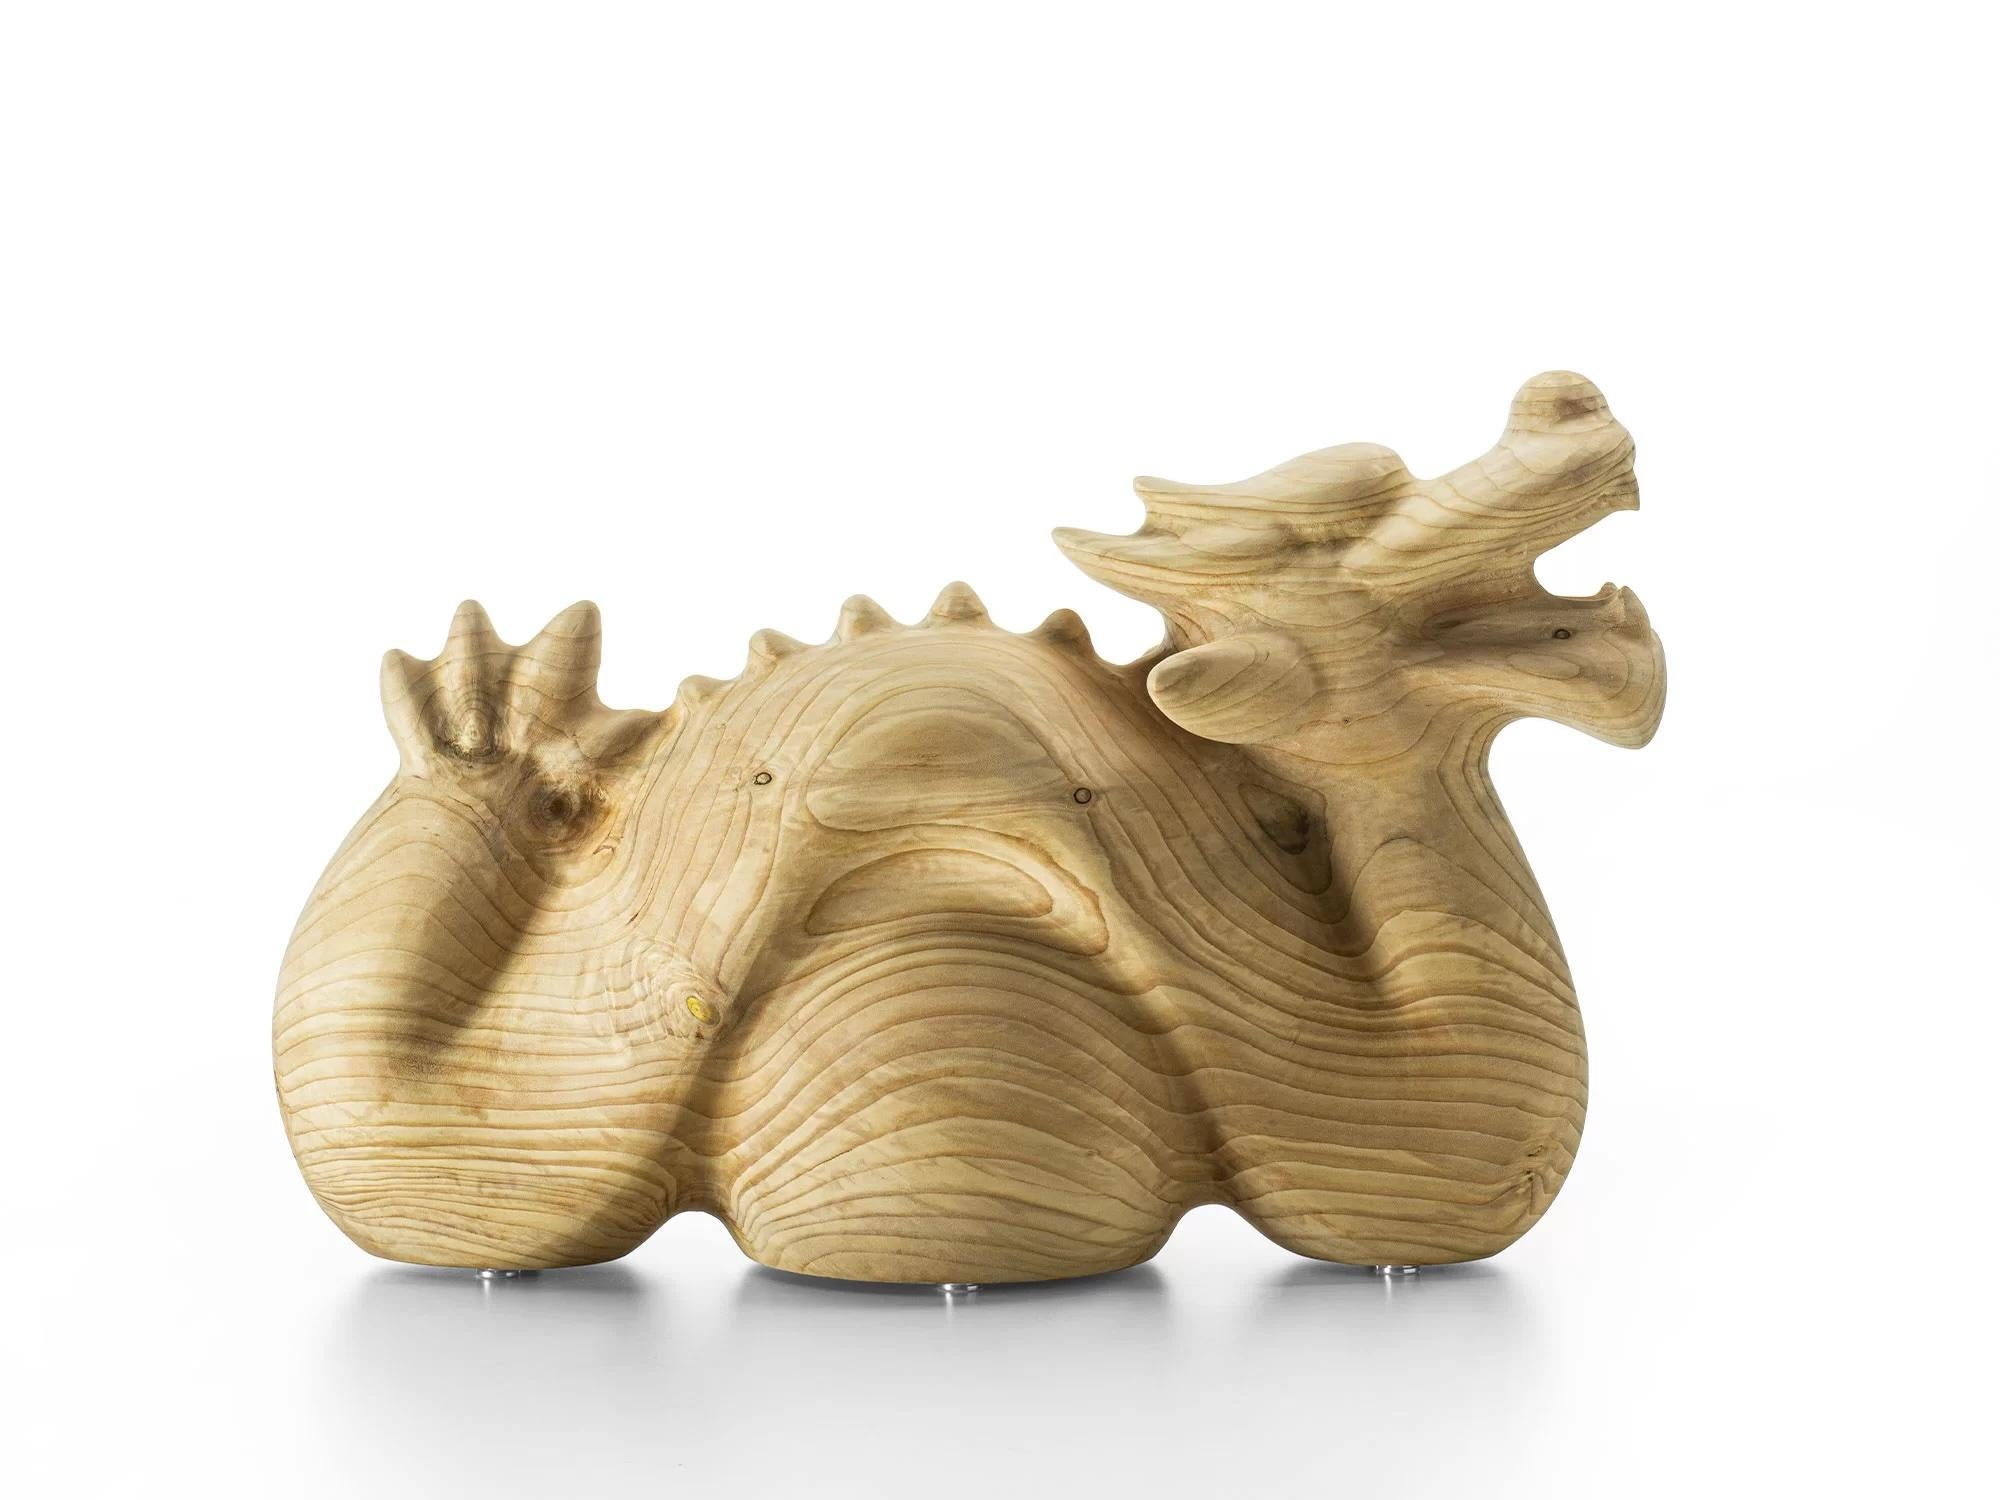 An exquisite furnishing accessory made from a single block of solid scented Cedarwood of Lebanon, its design celebrates the Chinese New Year by taking inspiration from the dragon, the symbol of lunar year 2024. A design object becomes a graceful,